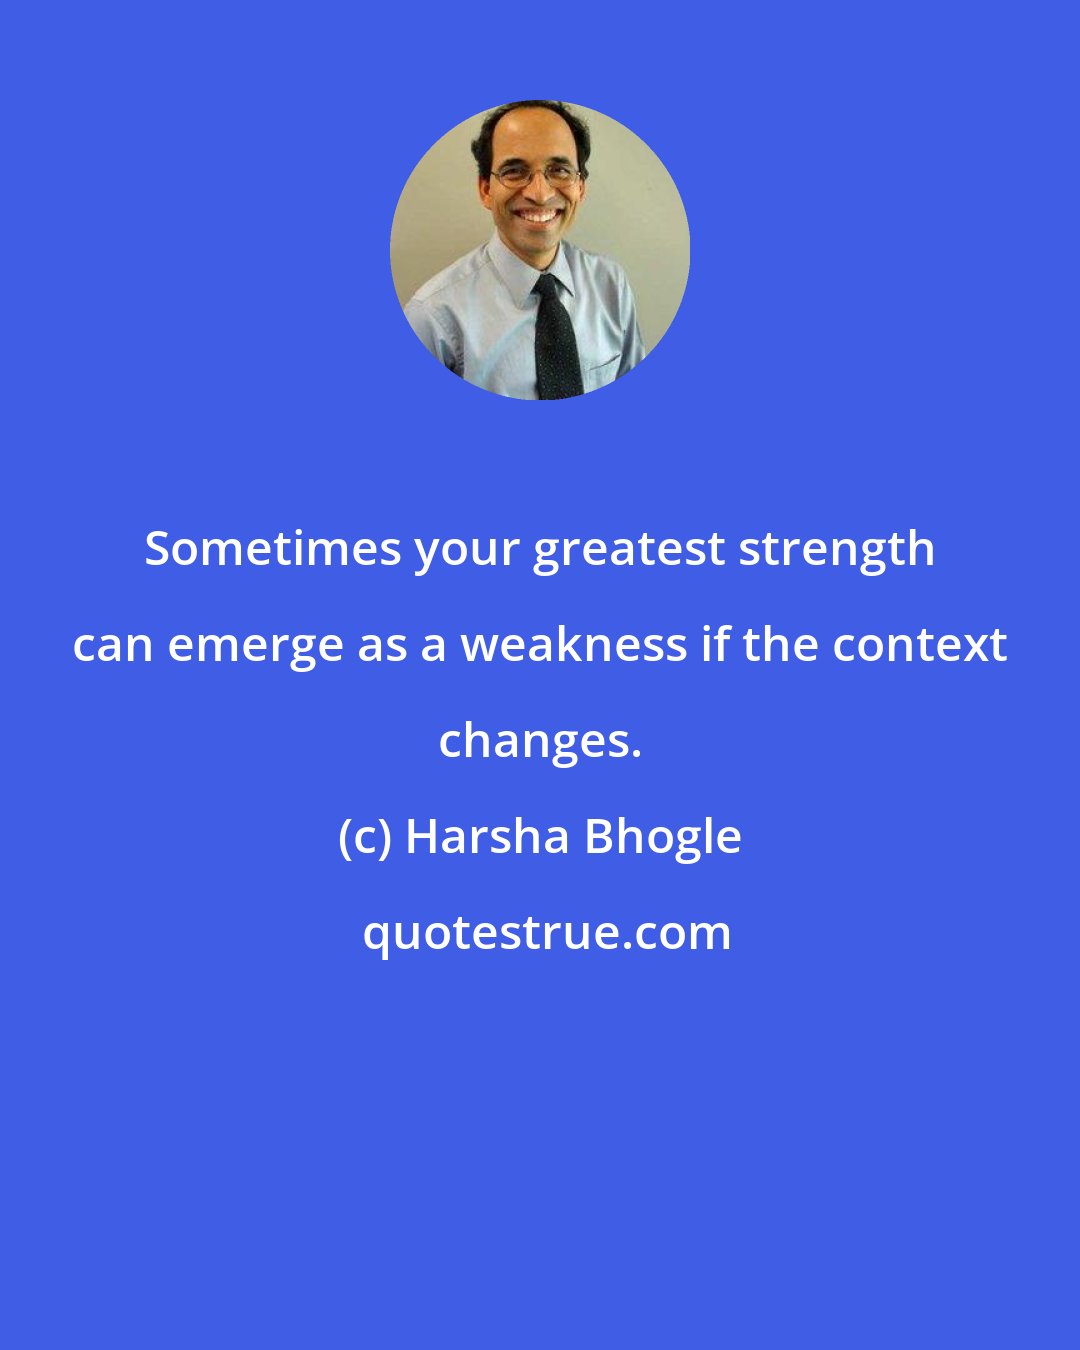 Harsha Bhogle: Sometimes your greatest strength can emerge as a weakness if the context changes.